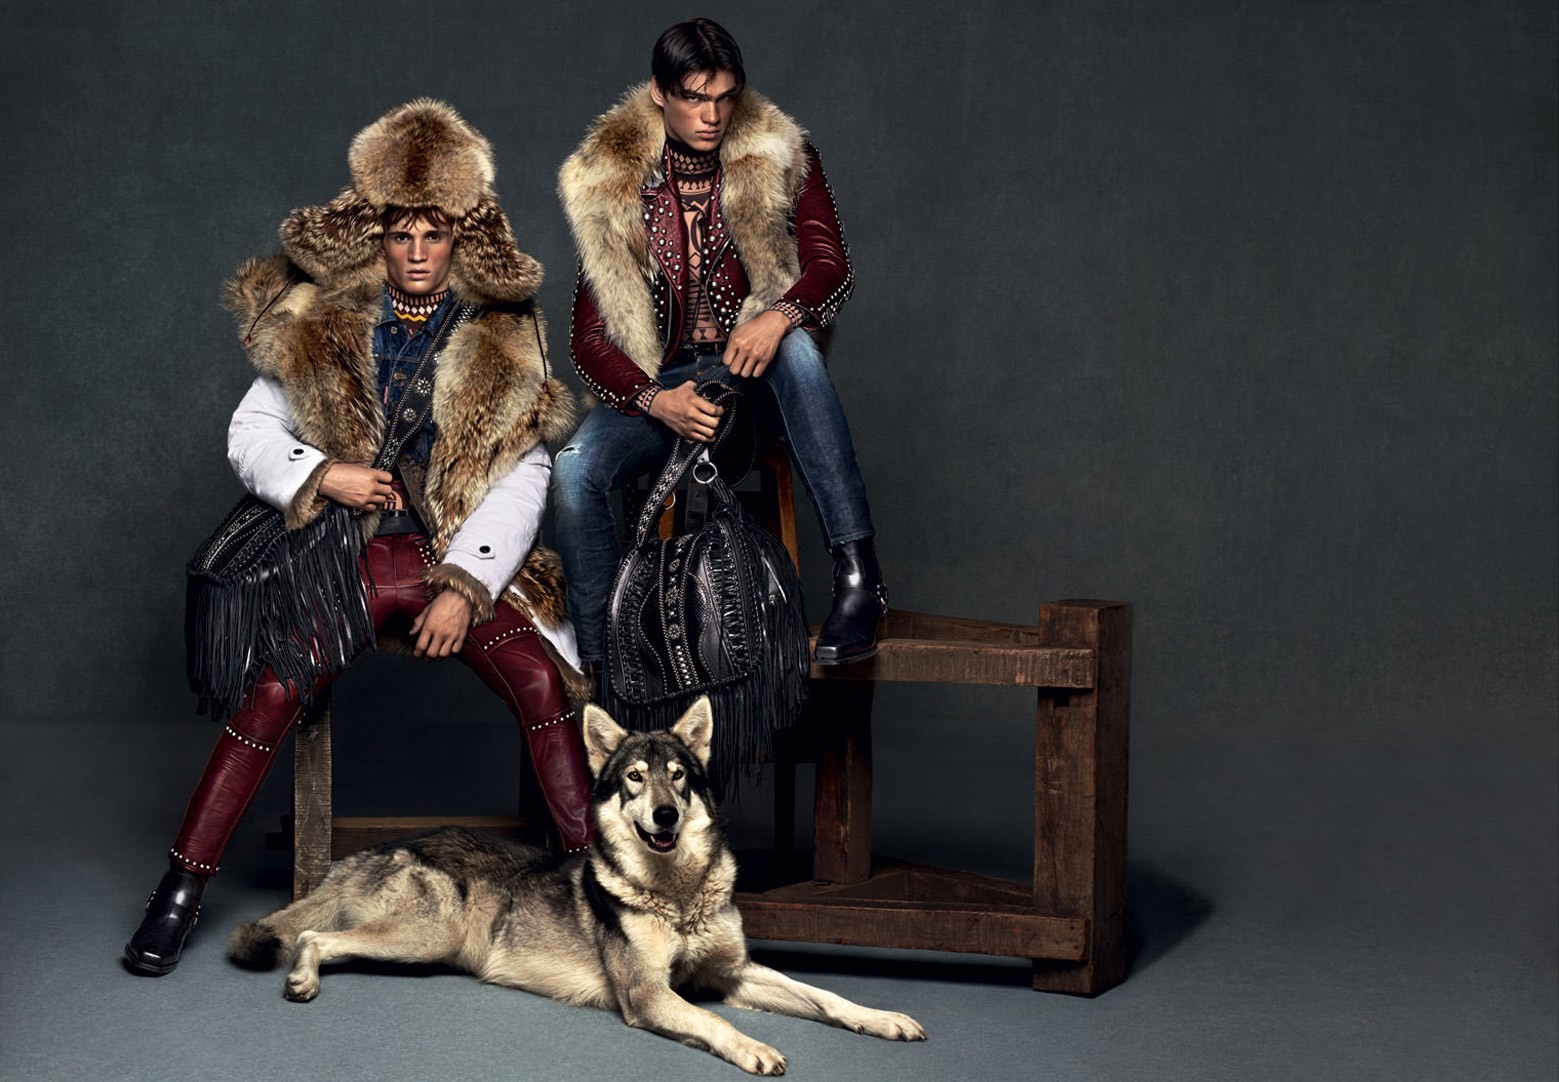 Does fur have a place in fashion? | Dazed